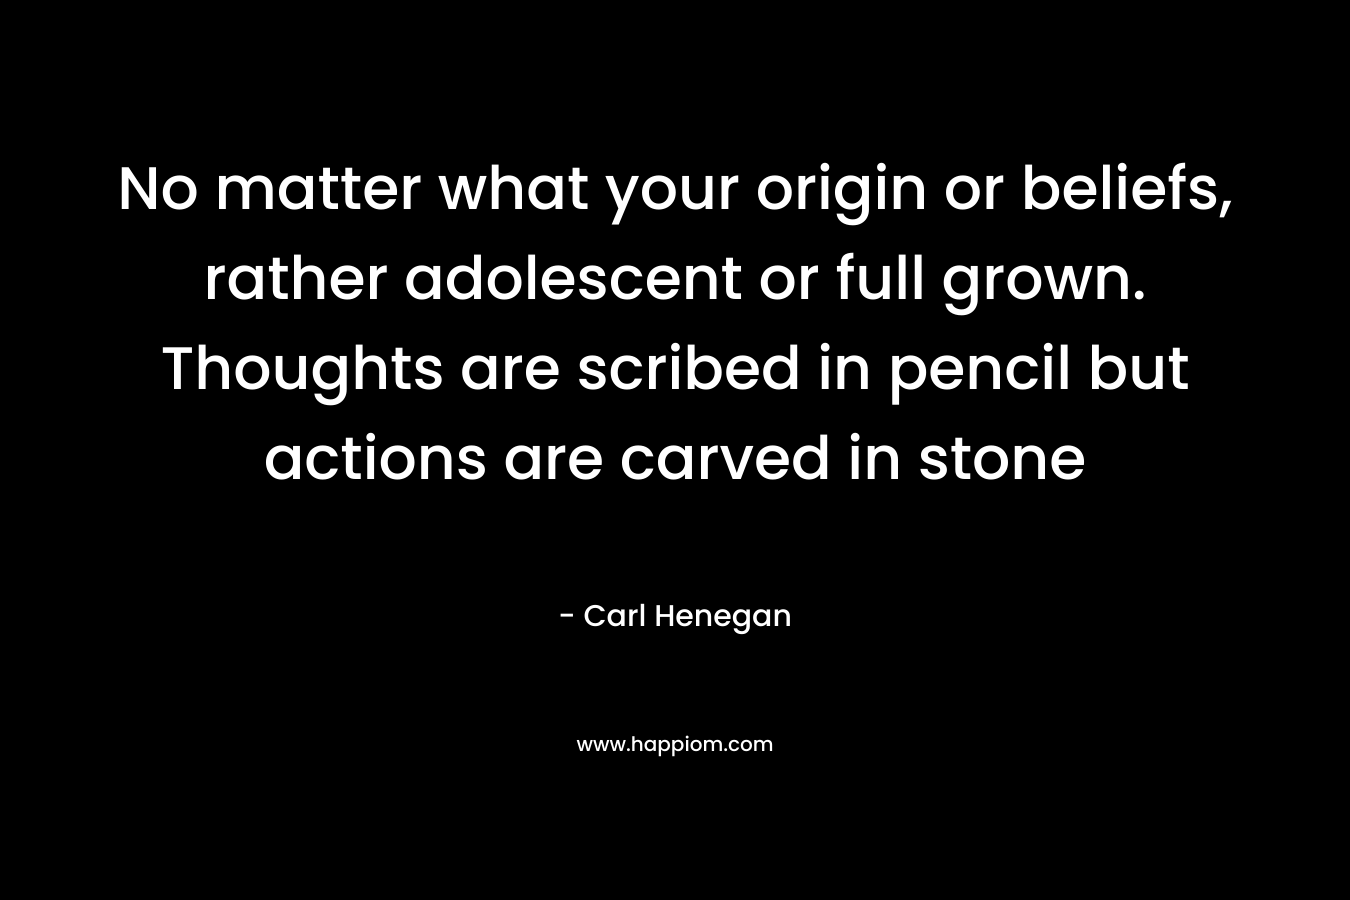 No matter what your origin or beliefs, rather adolescent or full grown. Thoughts are scribed in pencil but actions are carved in stone – Carl Henegan